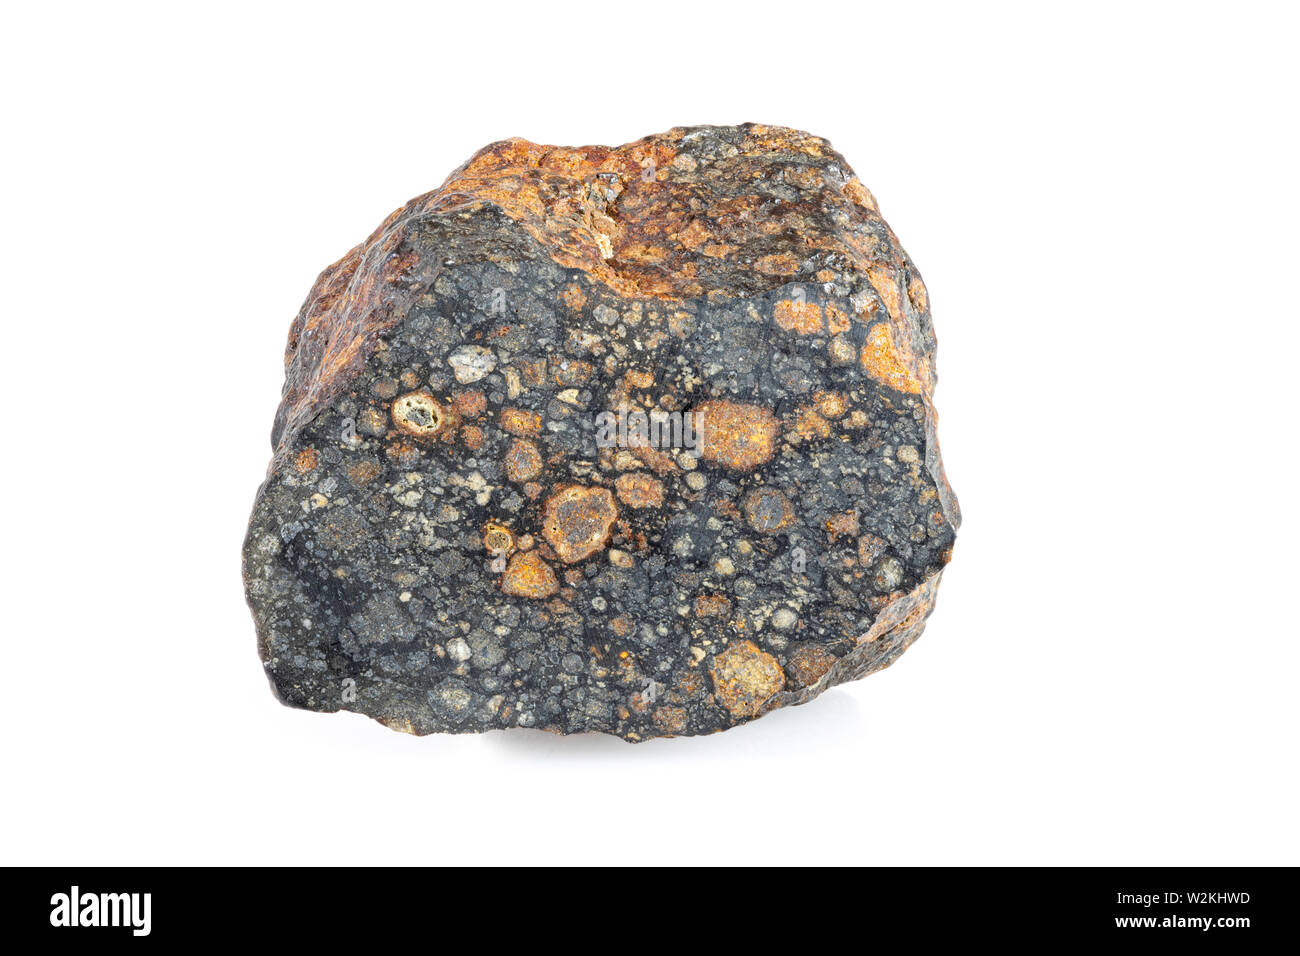 Carbonaceous Chondrite Meteorite Cross-section (CV3) formed by accretion of dust, small grains and calcium-aluminum-righ inclusions (CAIs) in the earl Stock Photo